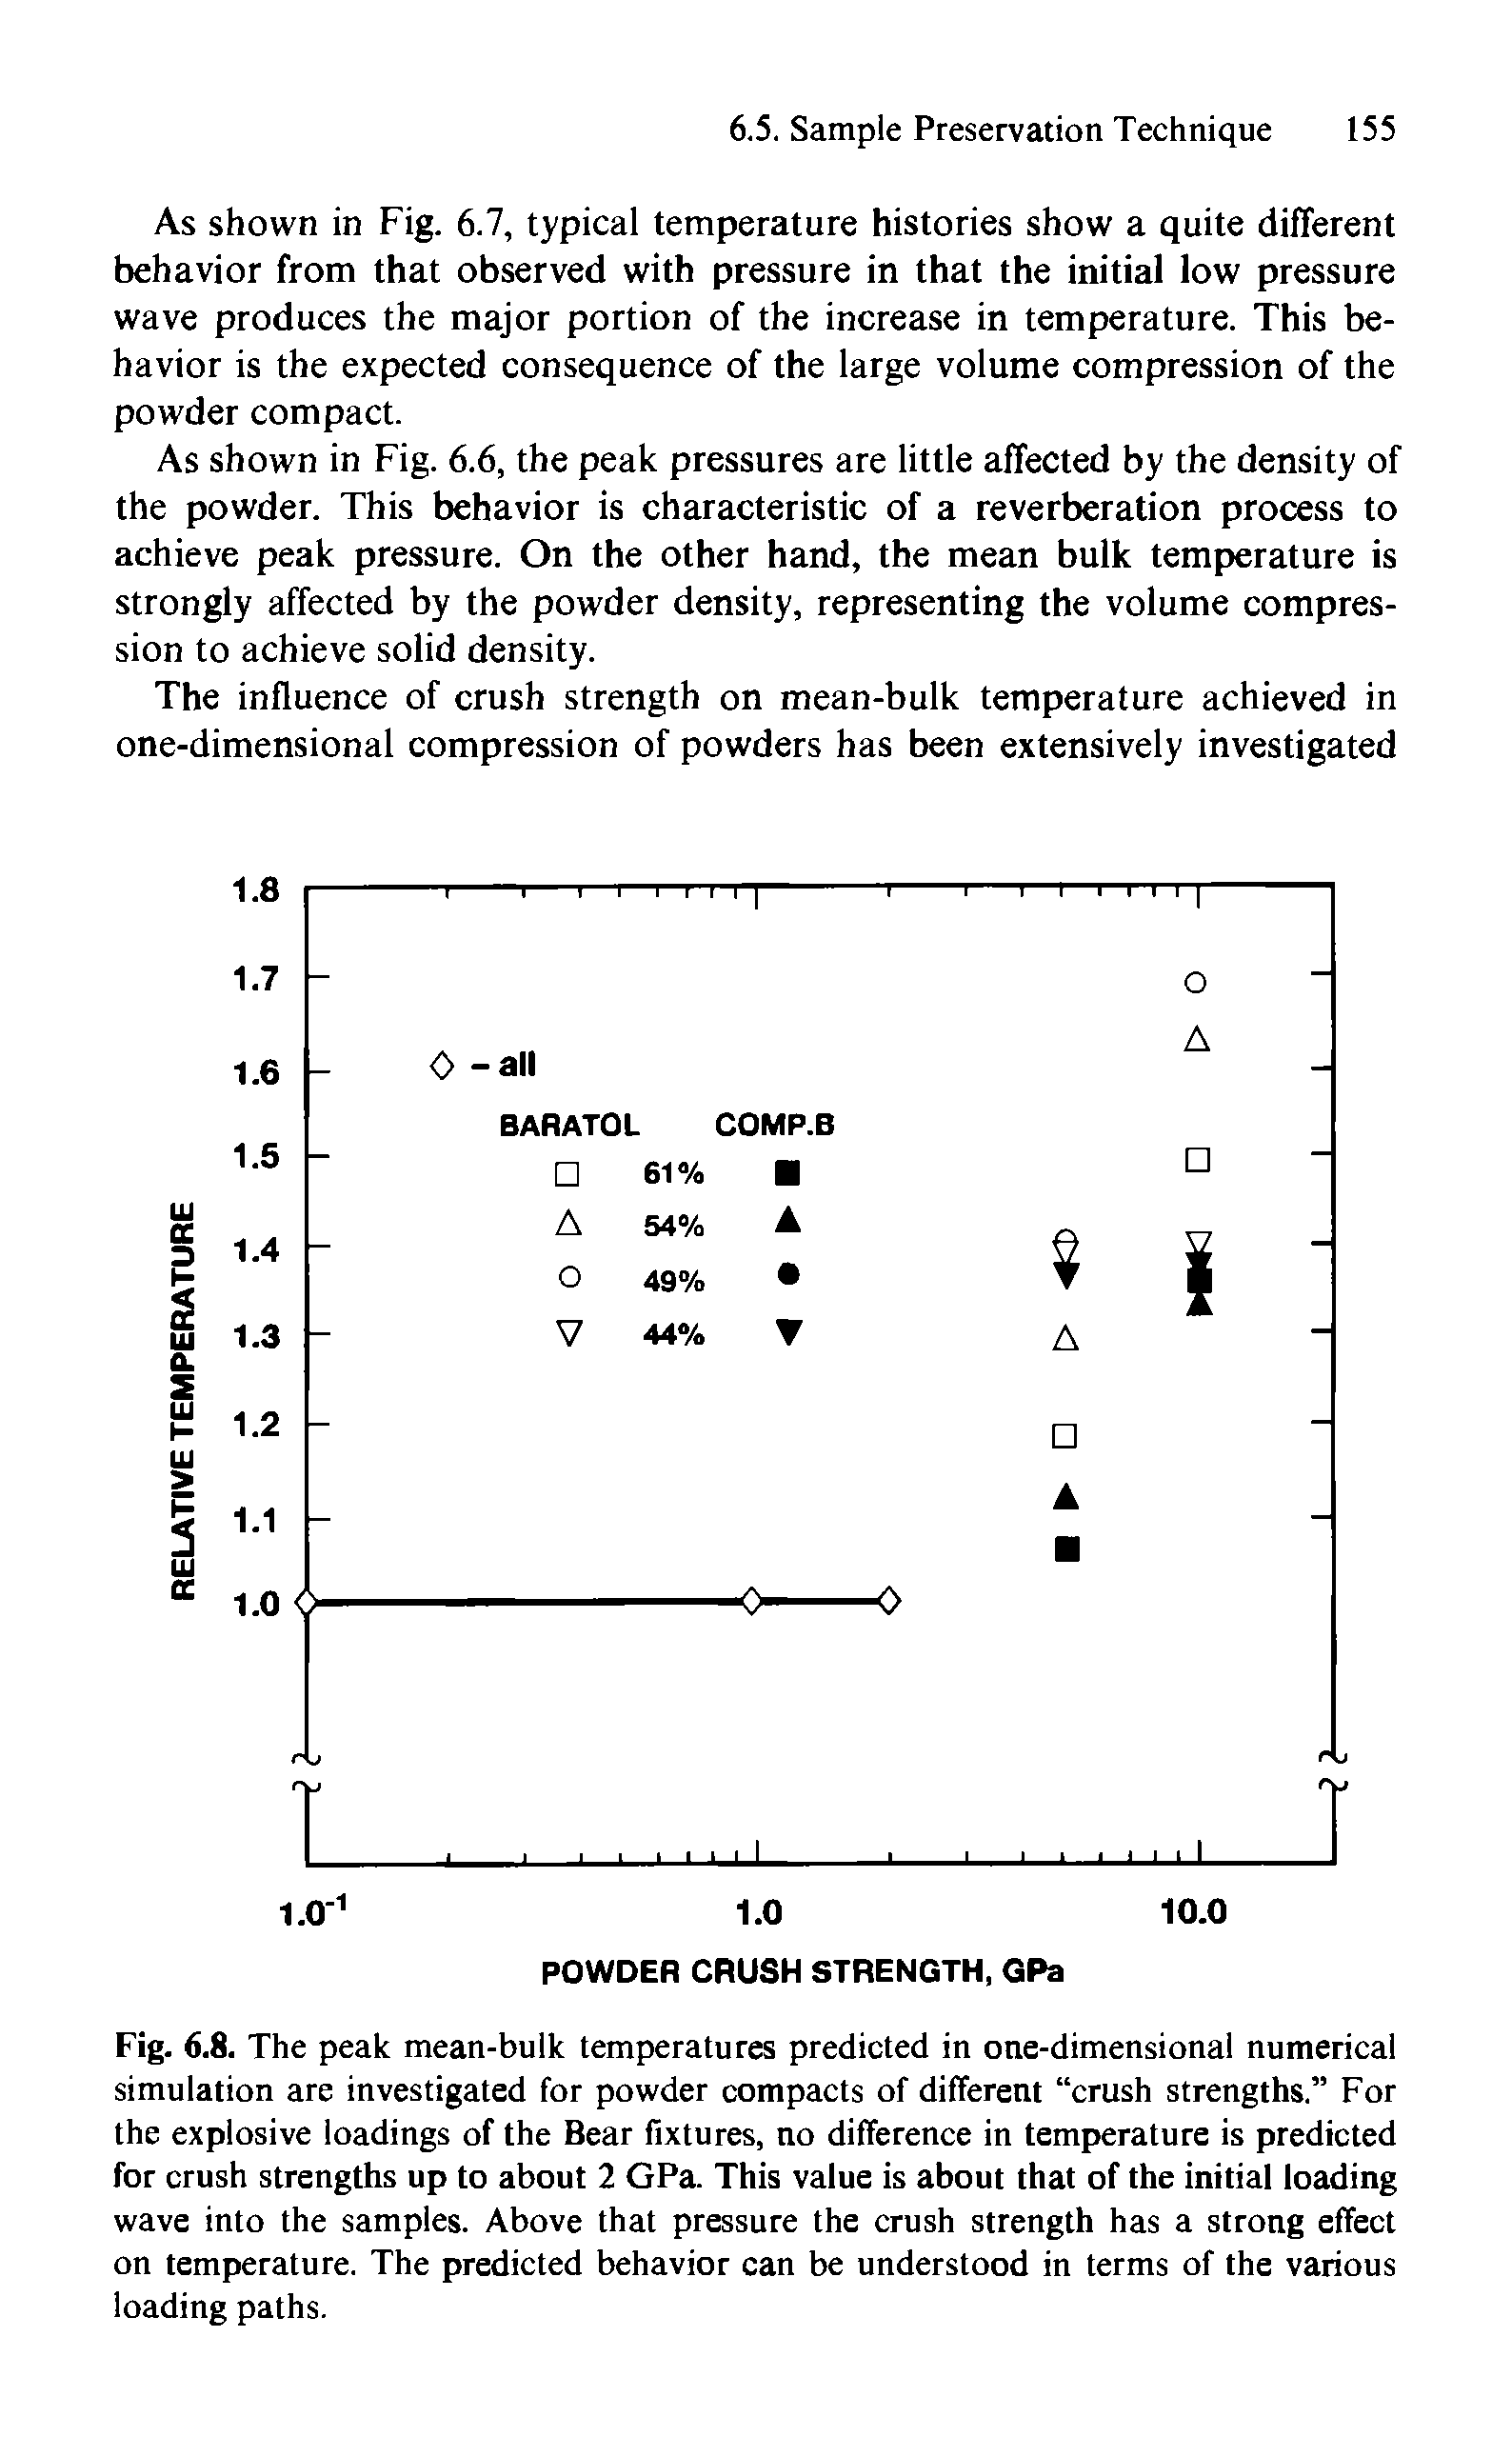 Fig. 6.8. The peak mean-bulk temperatures predicted in one-dimensional numerical simulation are investigated for powder compacts of different crush strengths. For the explosive loadings of the Bear fixtures, no difference in temperature is predicted for crush strengths up to about 2 GPa. This value is about that of the initial loading wave into the samples. Above that pressure the crush strength has a strong effect on temperature. The predicted behavior can be understood in terms of the various loading paths.